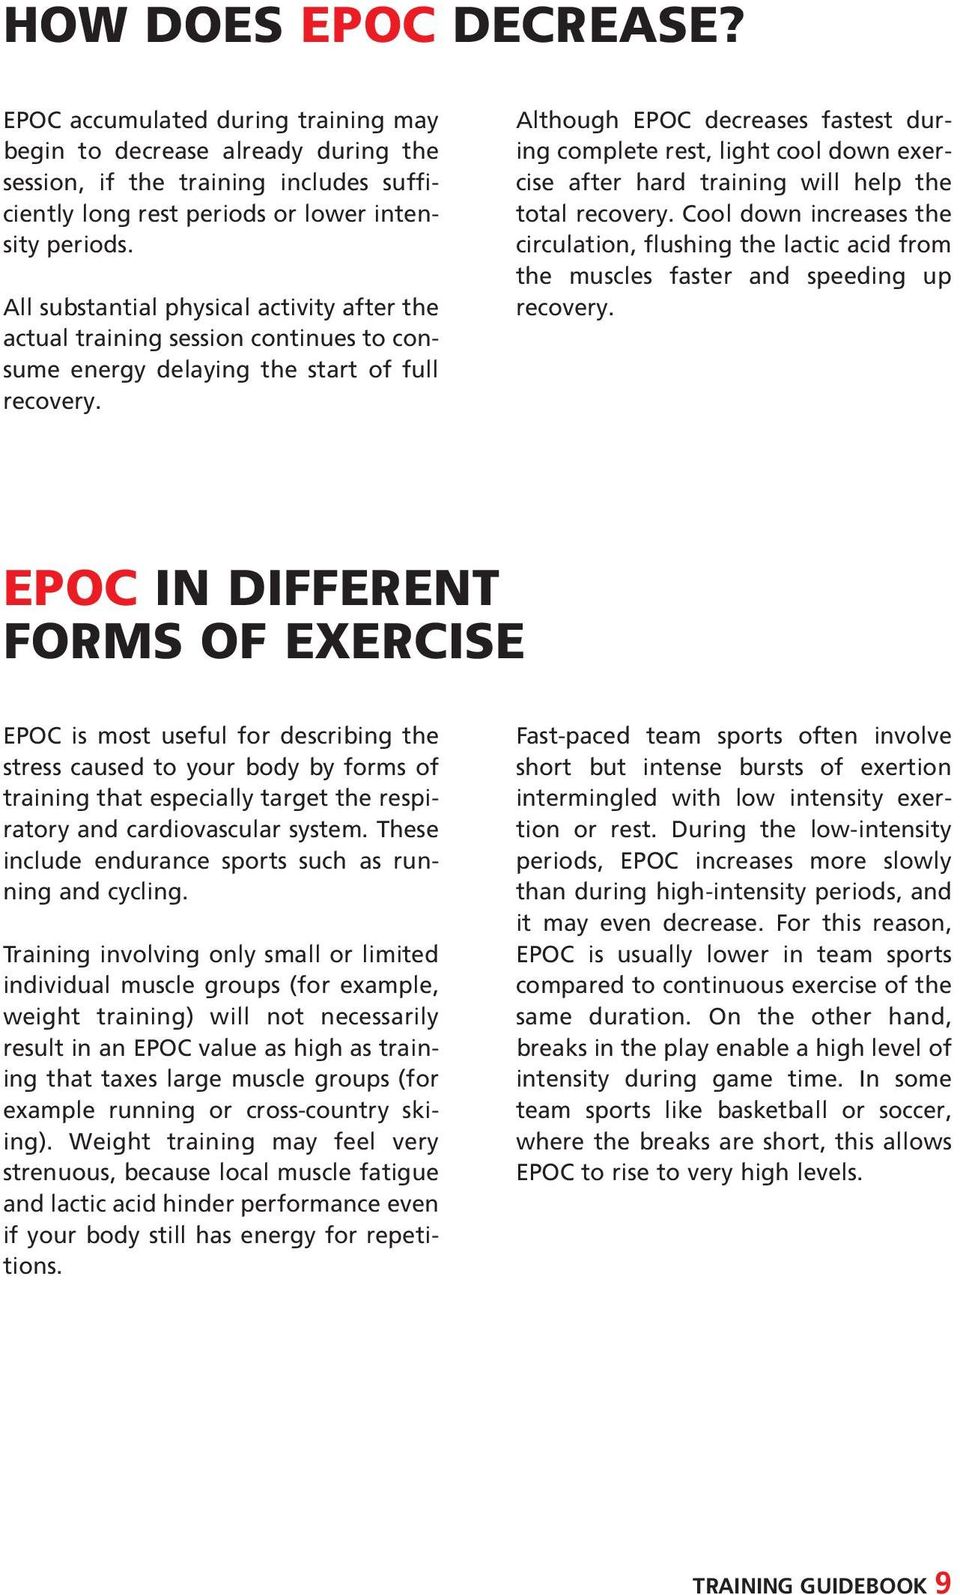 Although EPOC decreases fastest during complete rest, light cool down exercise after hard training will help the total recovery.